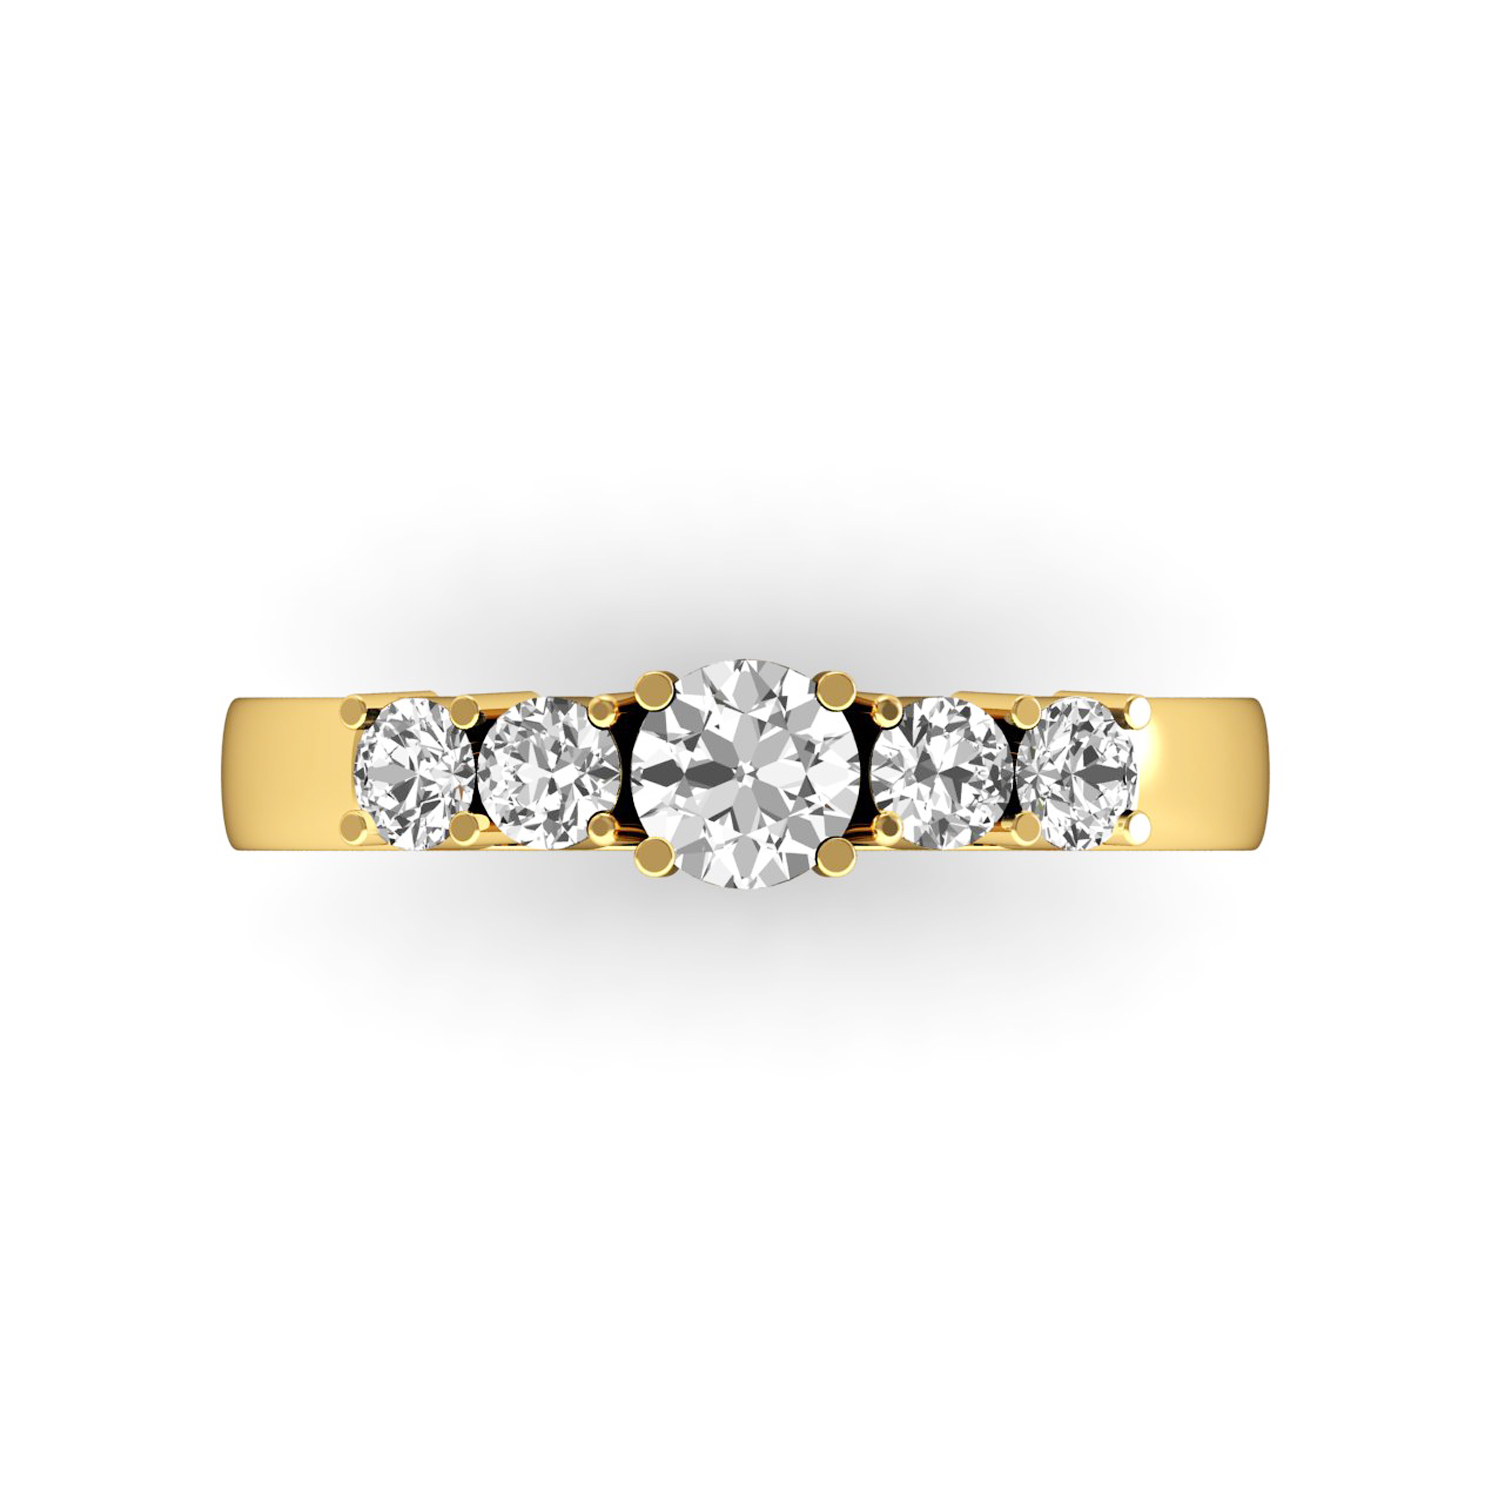 Authentic Diamond Solid Gold Wedding Ring